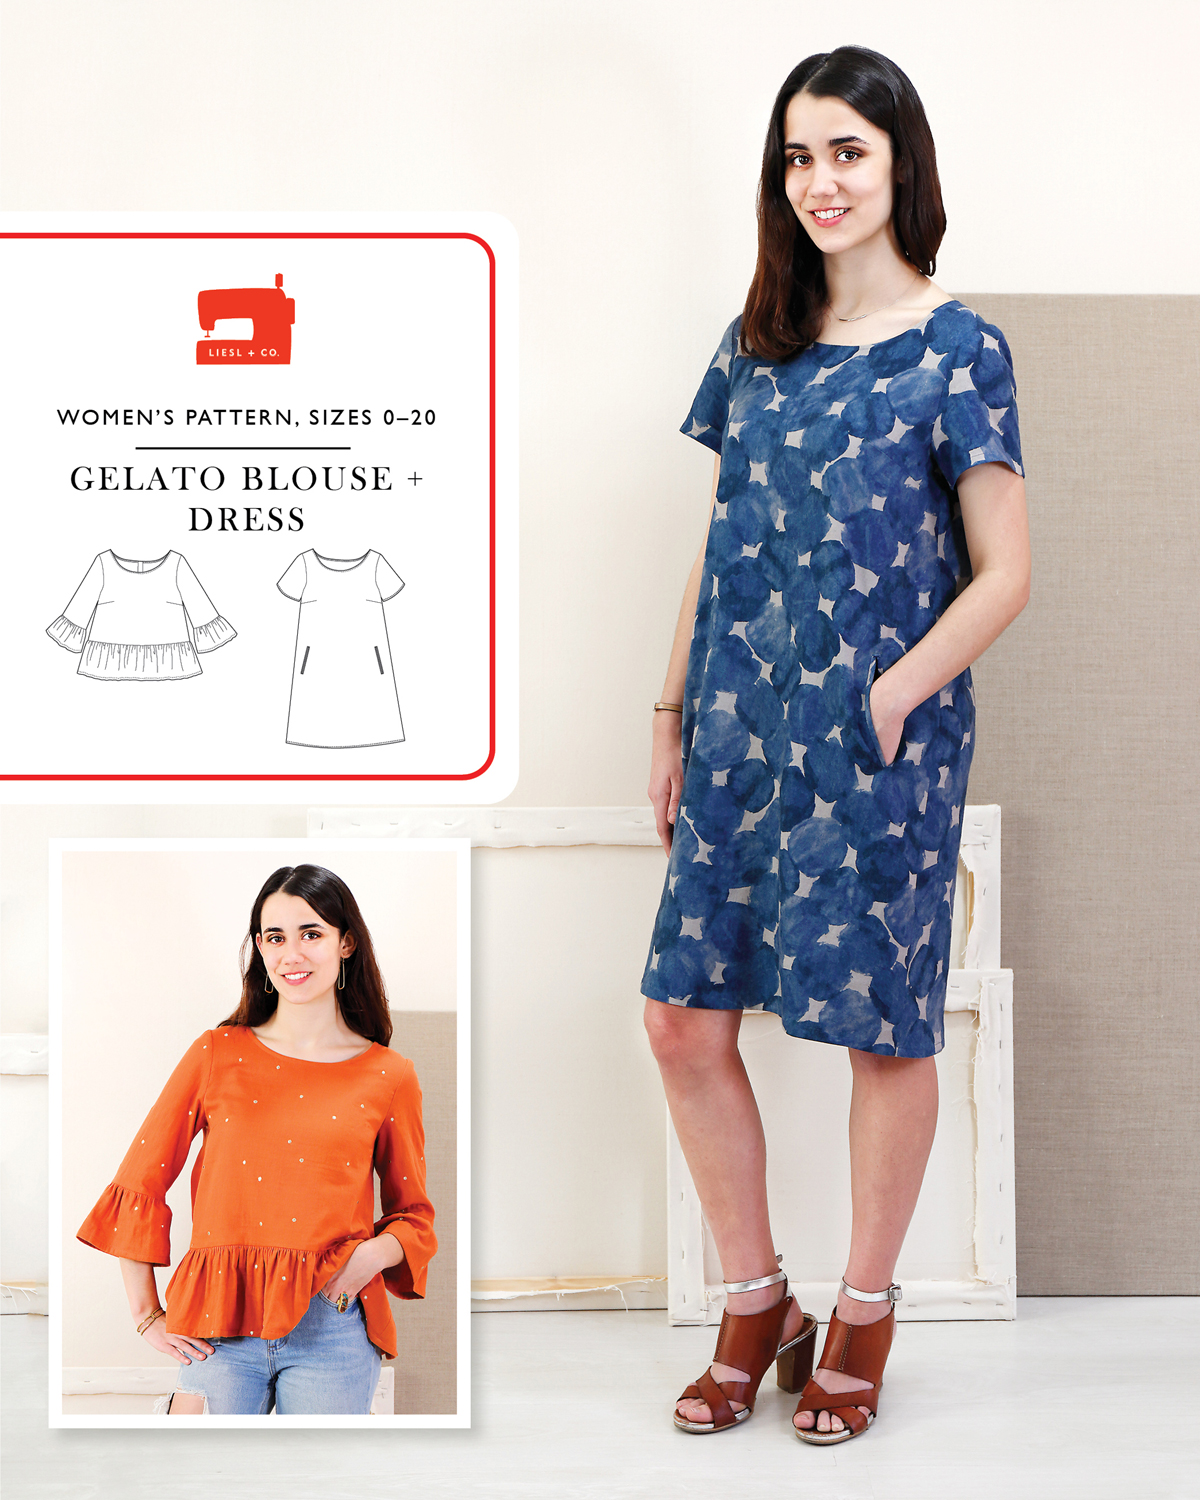 Introducing the Liesl + Co. Gelato Blouse + Dress Sewing Pattern